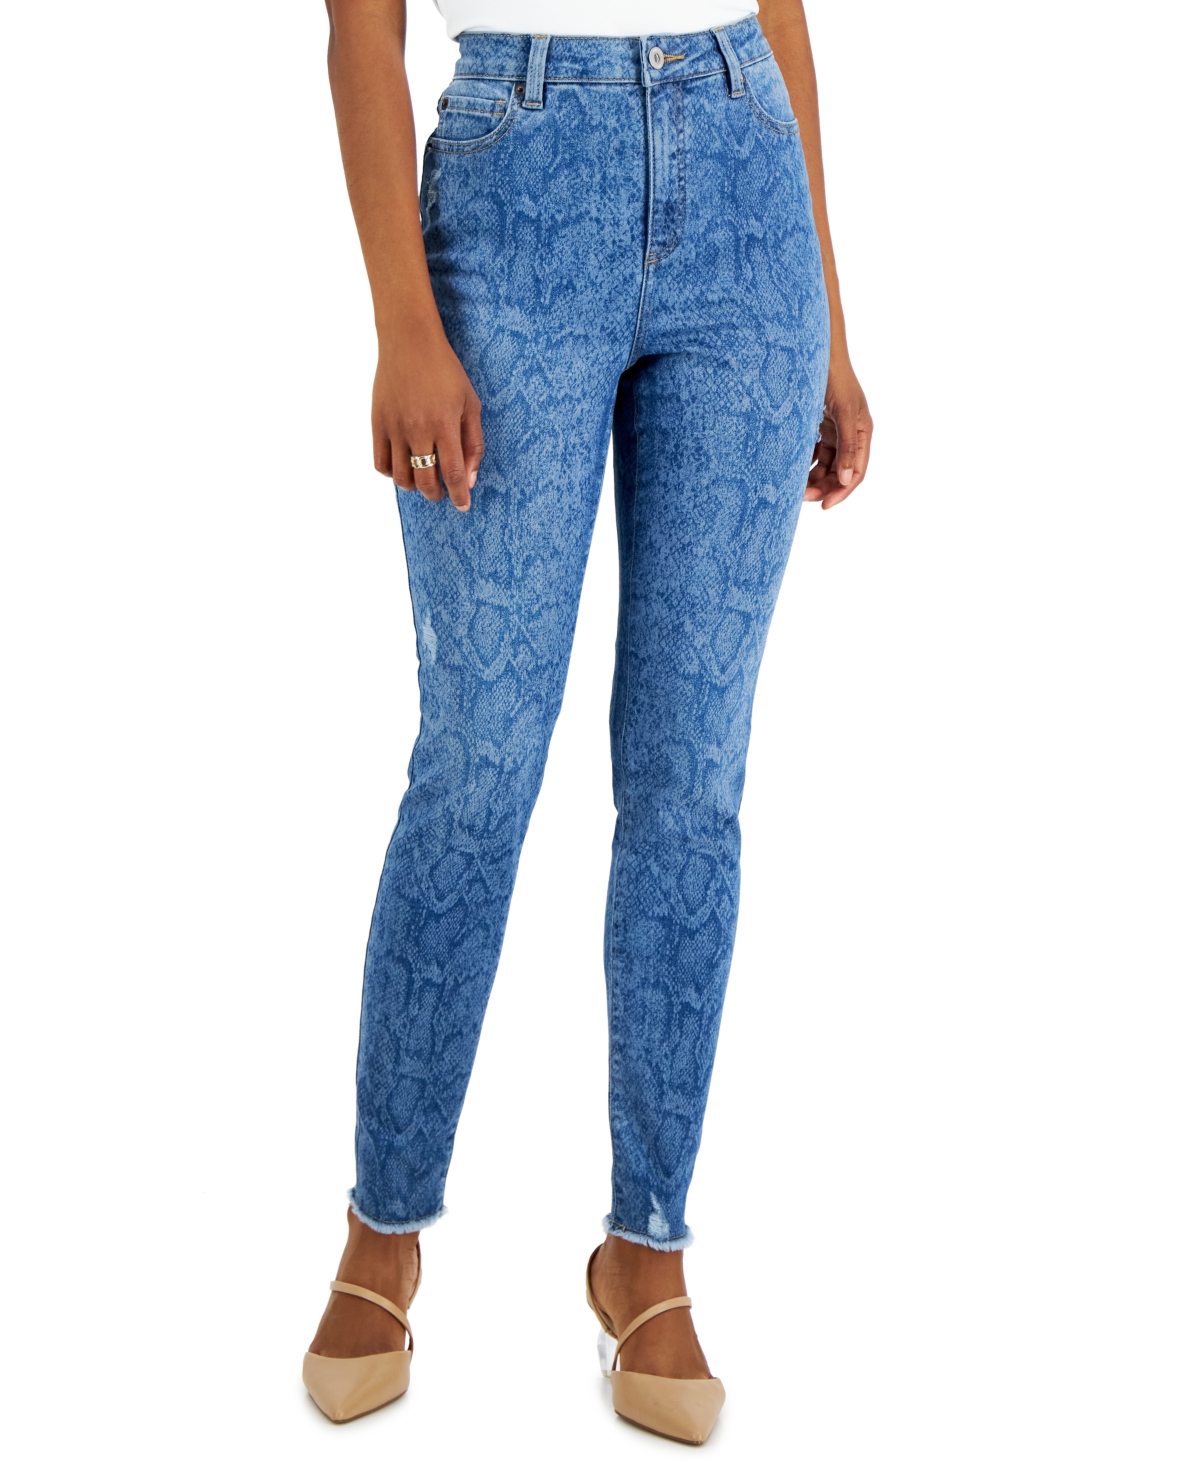  Inc International Concepts Women's High-Rise Snakeskin-Print Skinny Jeans, Created for Macy's